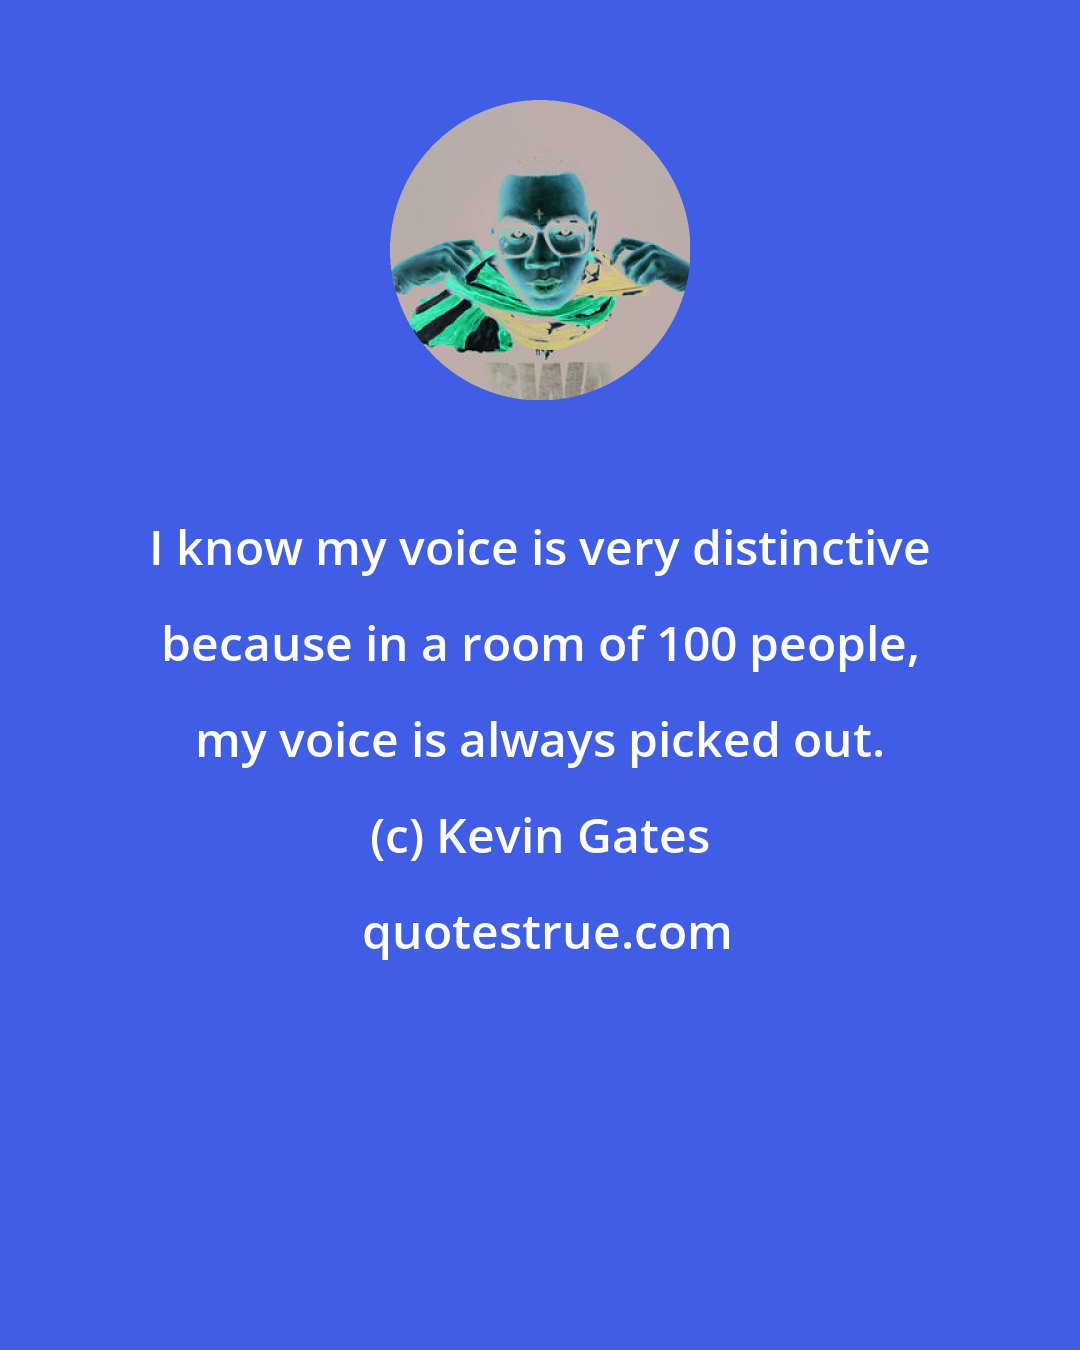 Kevin Gates: I know my voice is very distinctive because in a room of 100 people, my voice is always picked out.